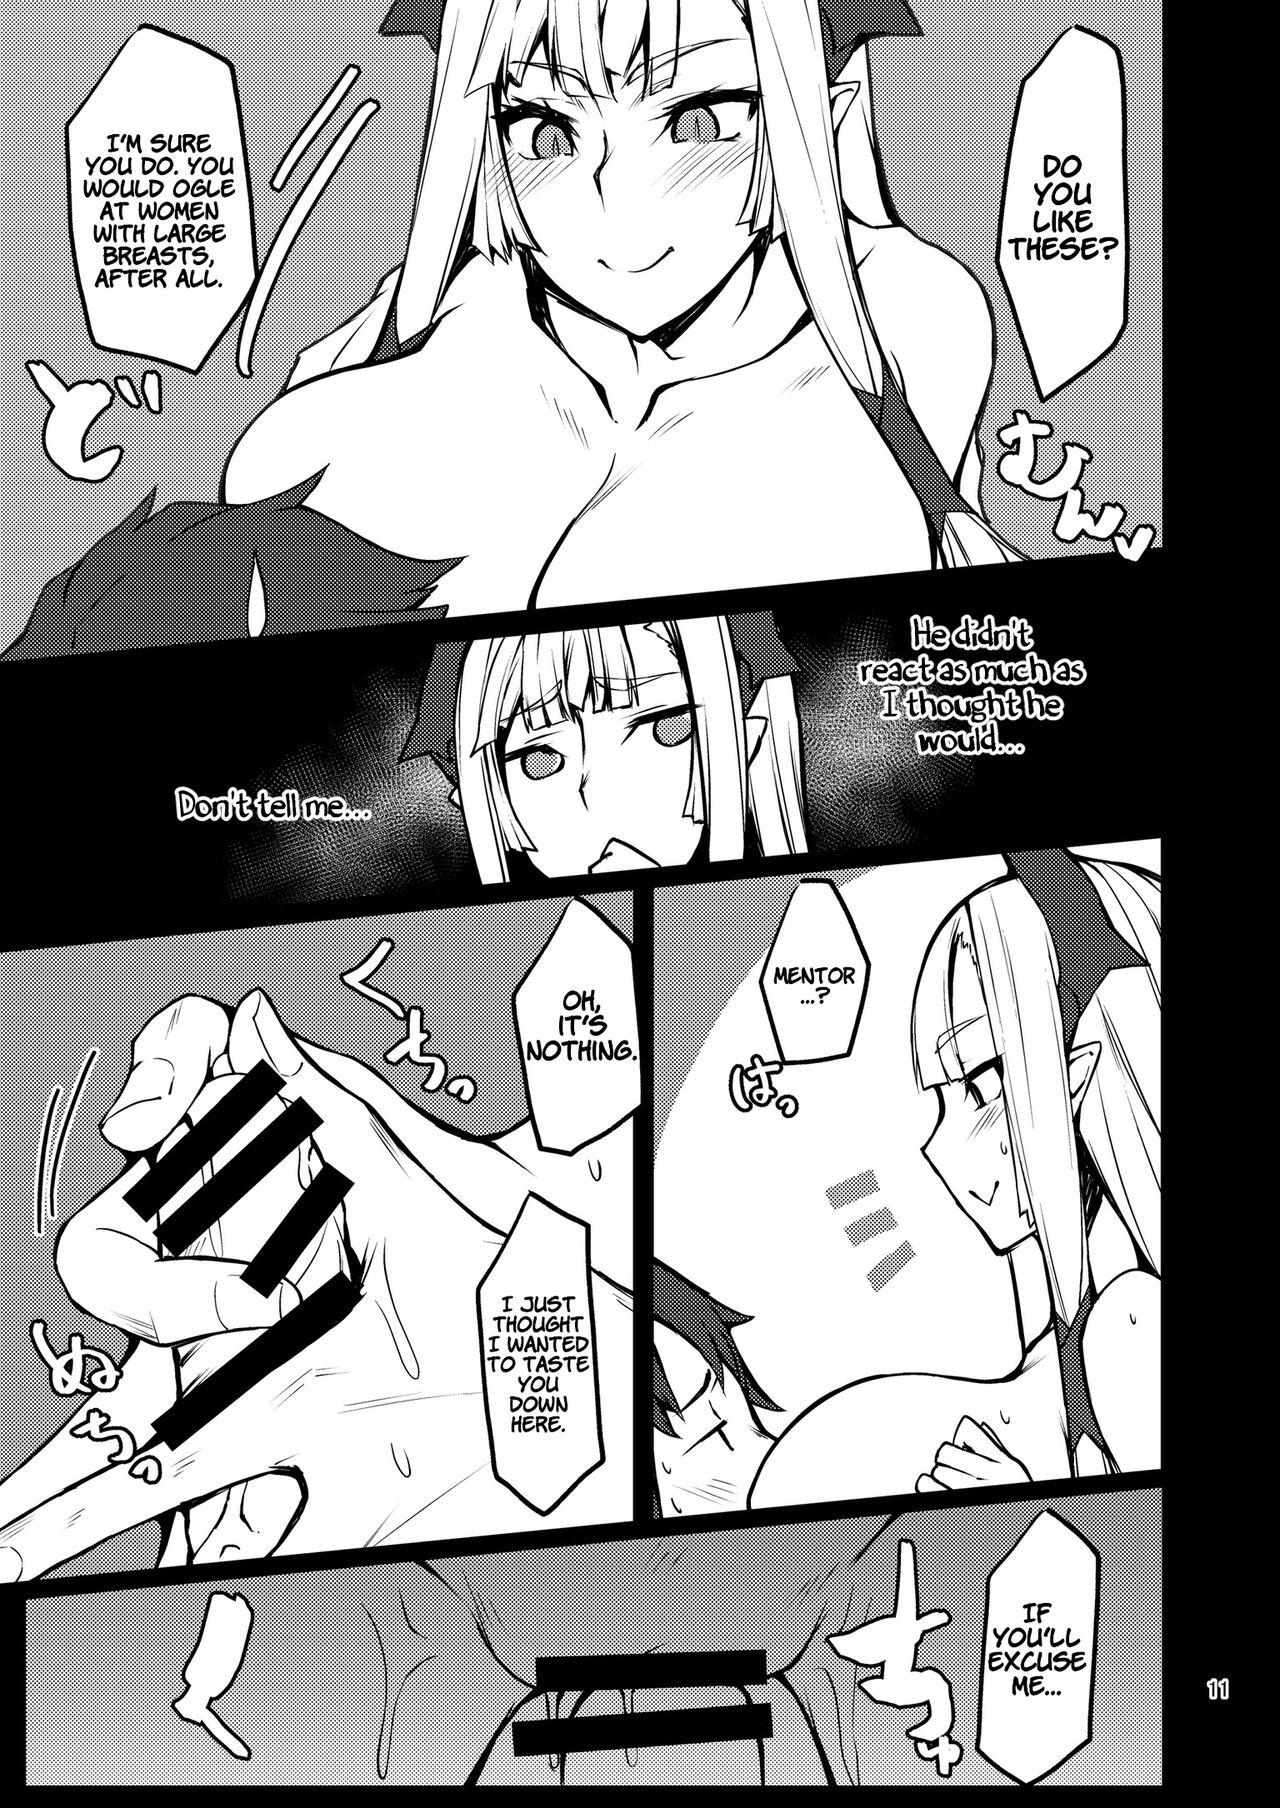 Hoe Kiichi Hougen Book: Mentor - Fate grand order Masterbation - Page 10